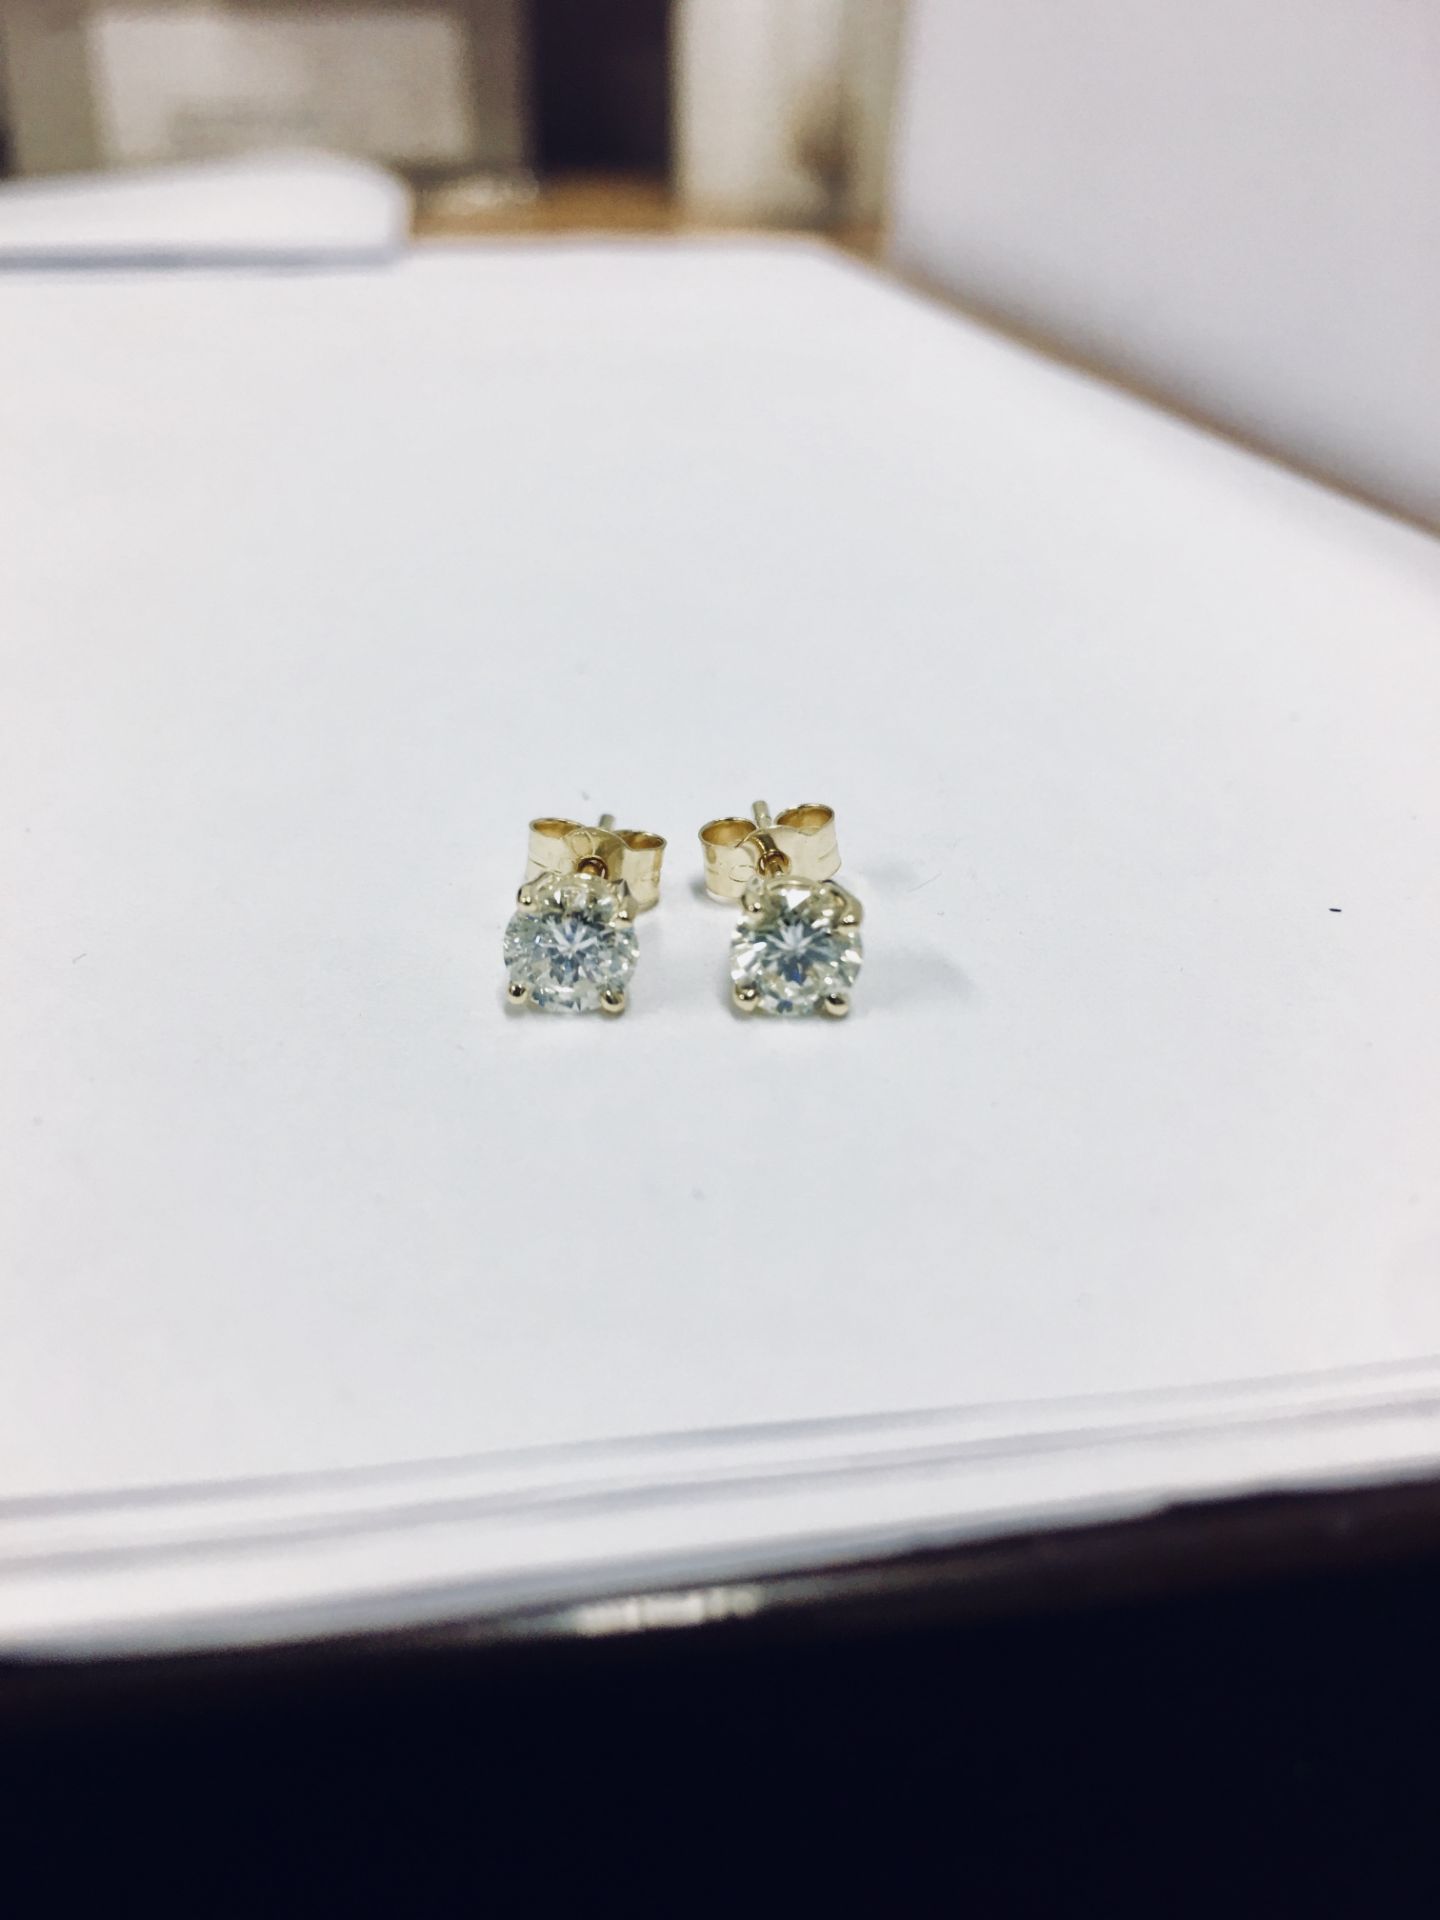 1.00ct diamond solitaire earrings set in 18ct yellow gold. 2 x brilliant cut diamonds, 0.50ct ( - Image 4 of 4